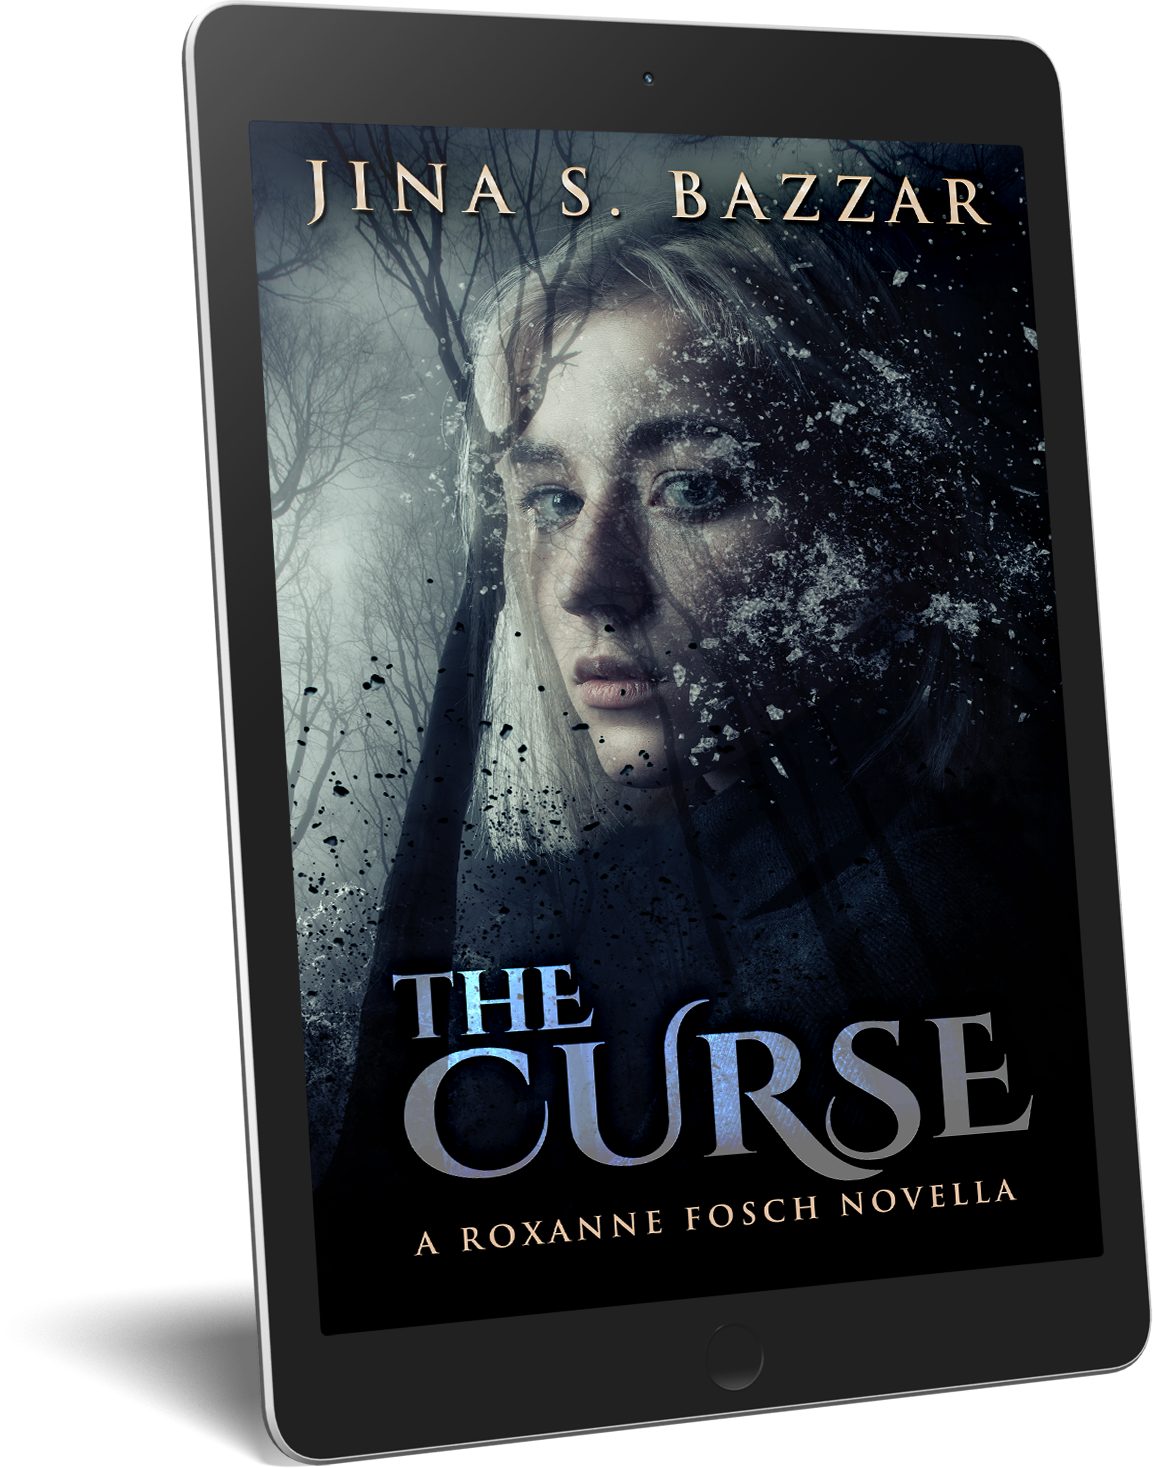 FREE: The Curse by Jina S. Bazzar